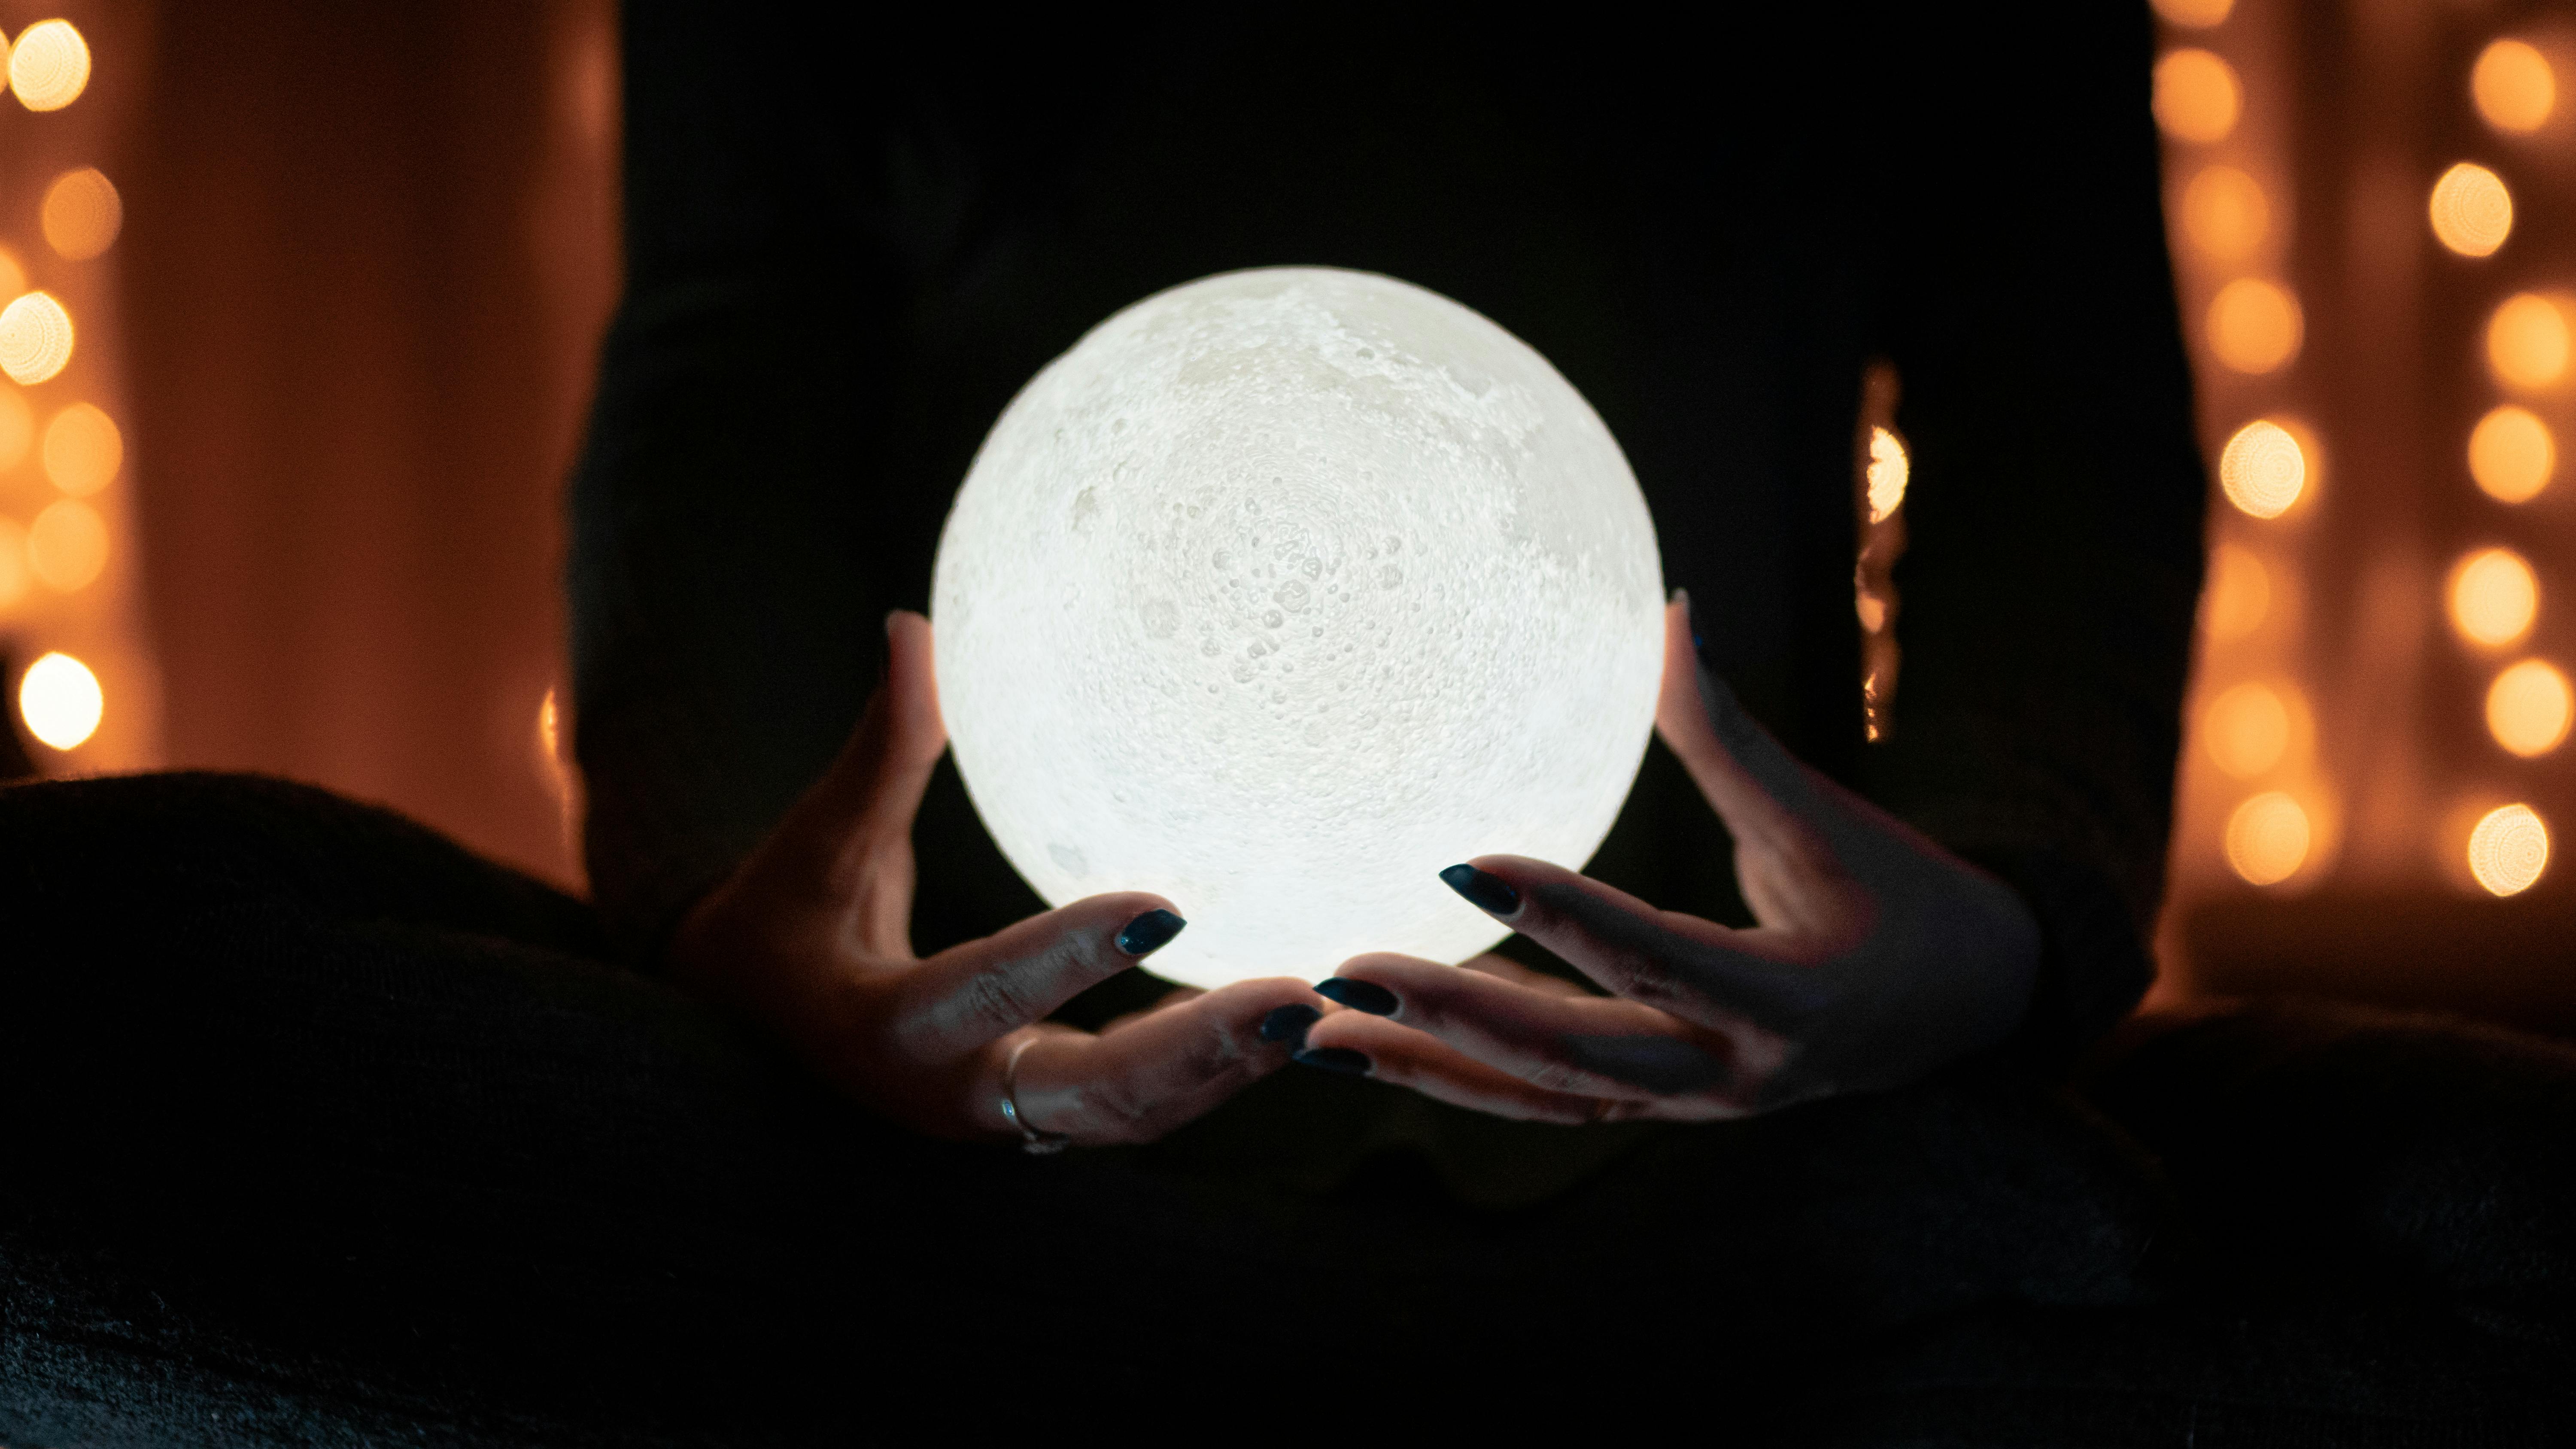 Hands holding a crystal ball.